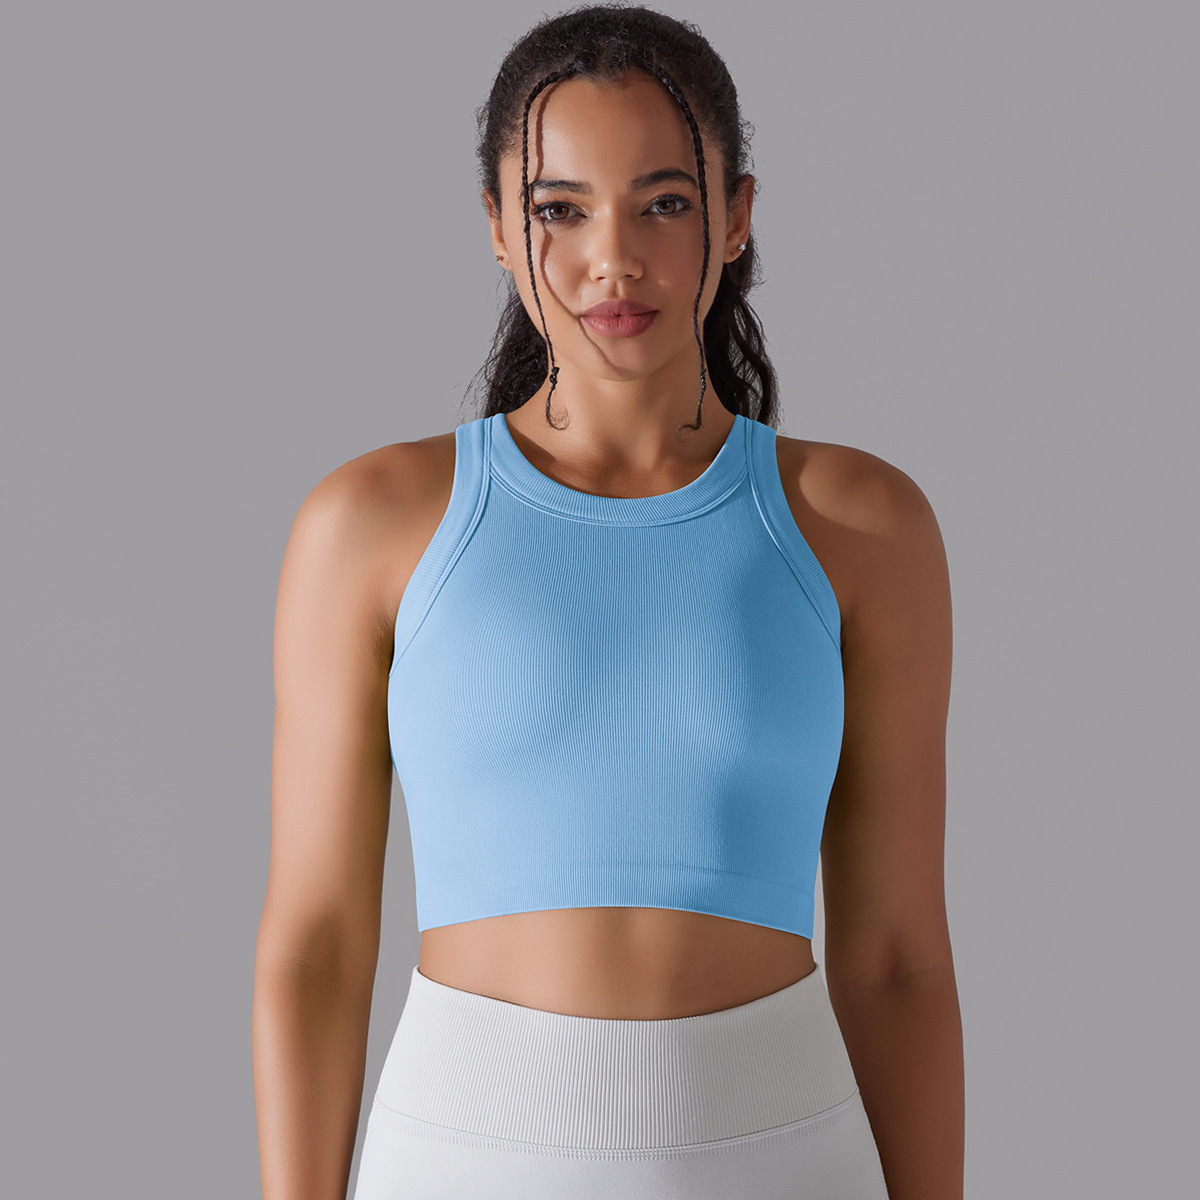 New Seamless Knitted Solid Color Rib Semi-Fixed Cup Yoga Clothes Exercise Sleeveless Vest Running Fitness Top Women